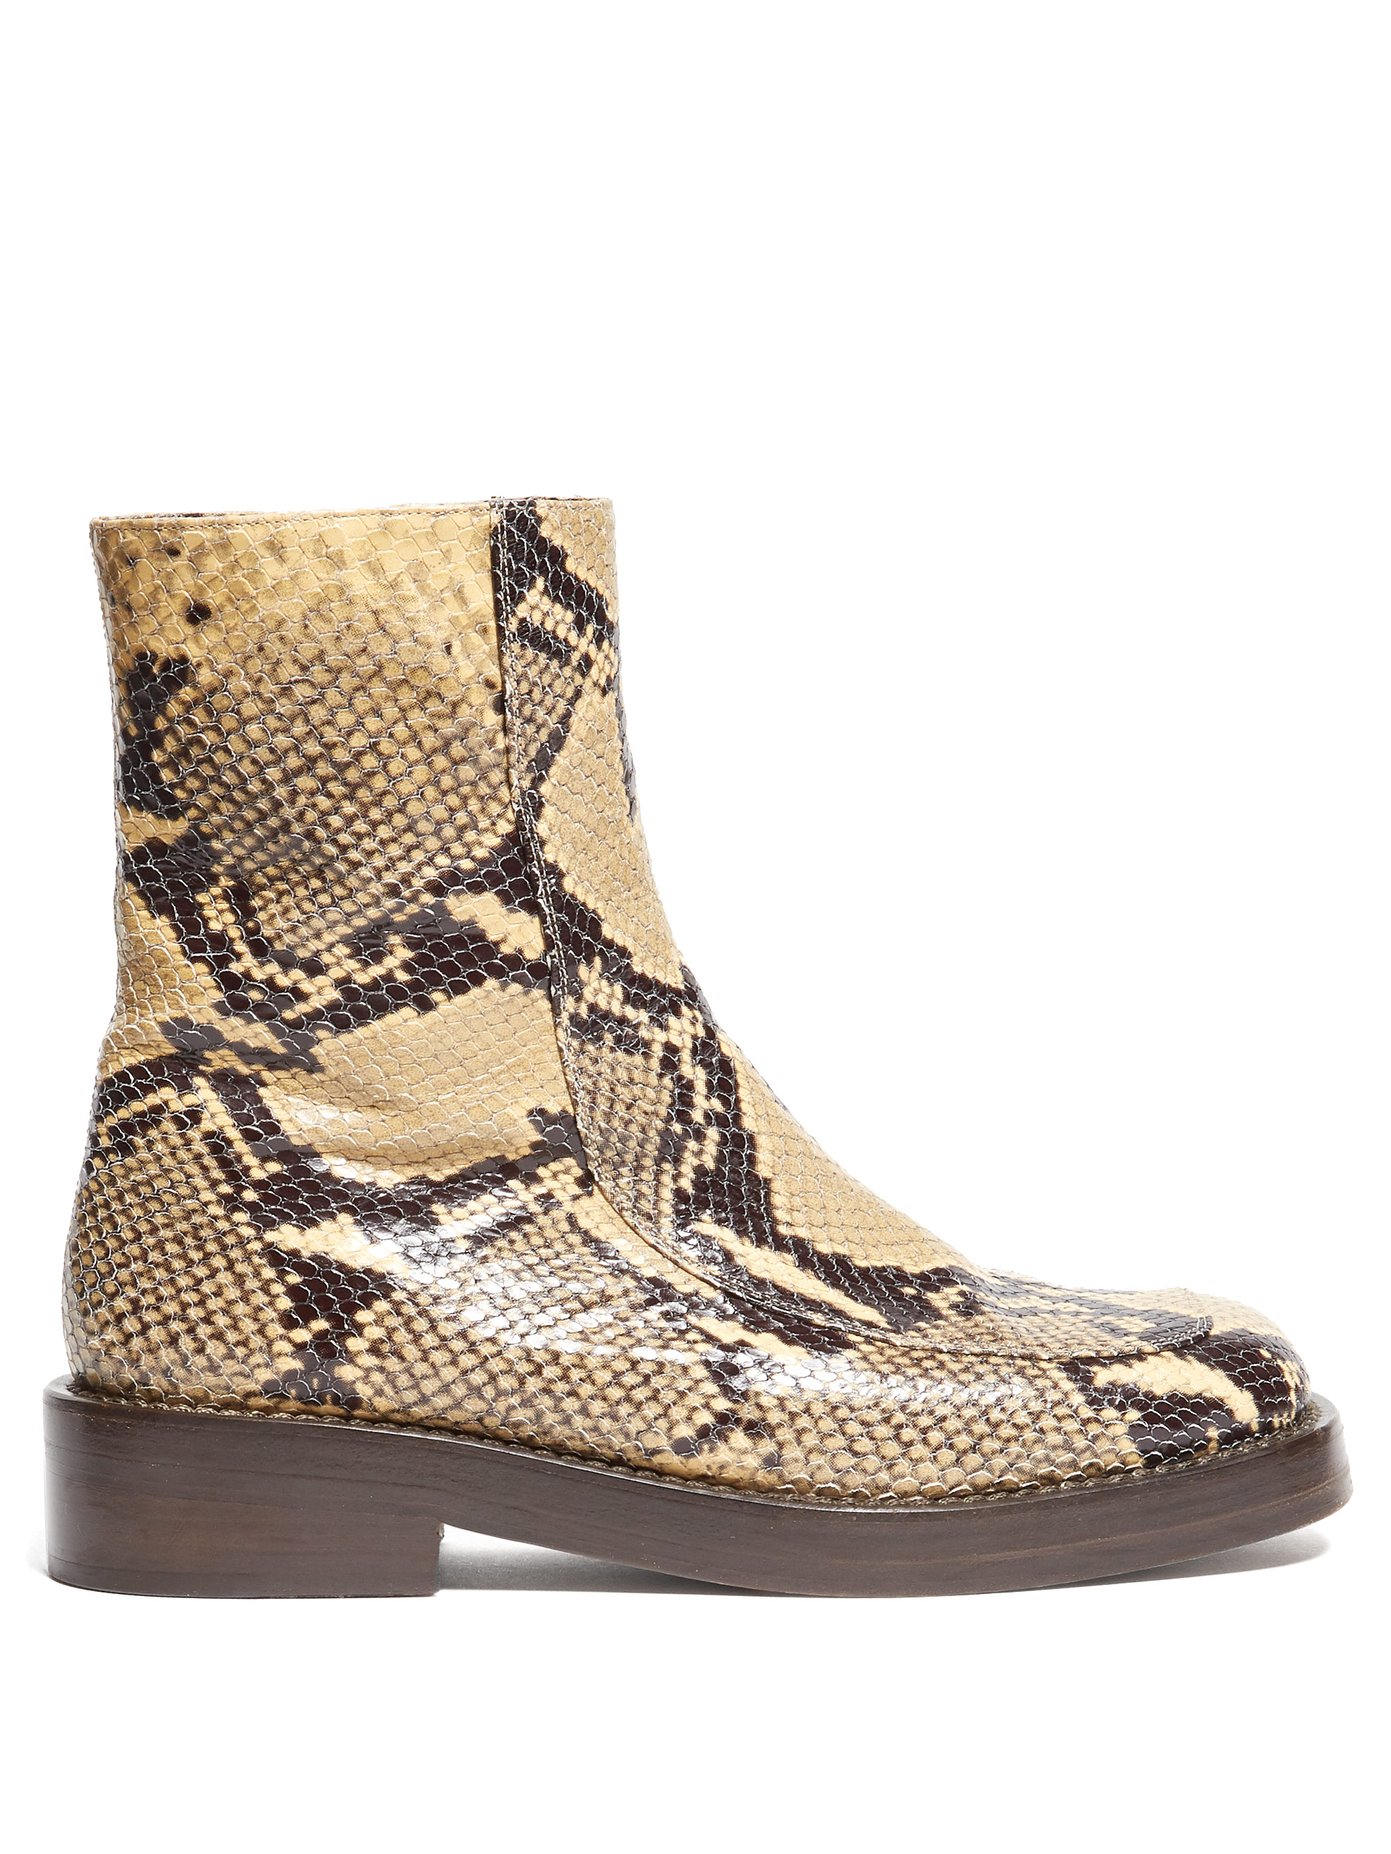 Python-effect leather boots | Marni 